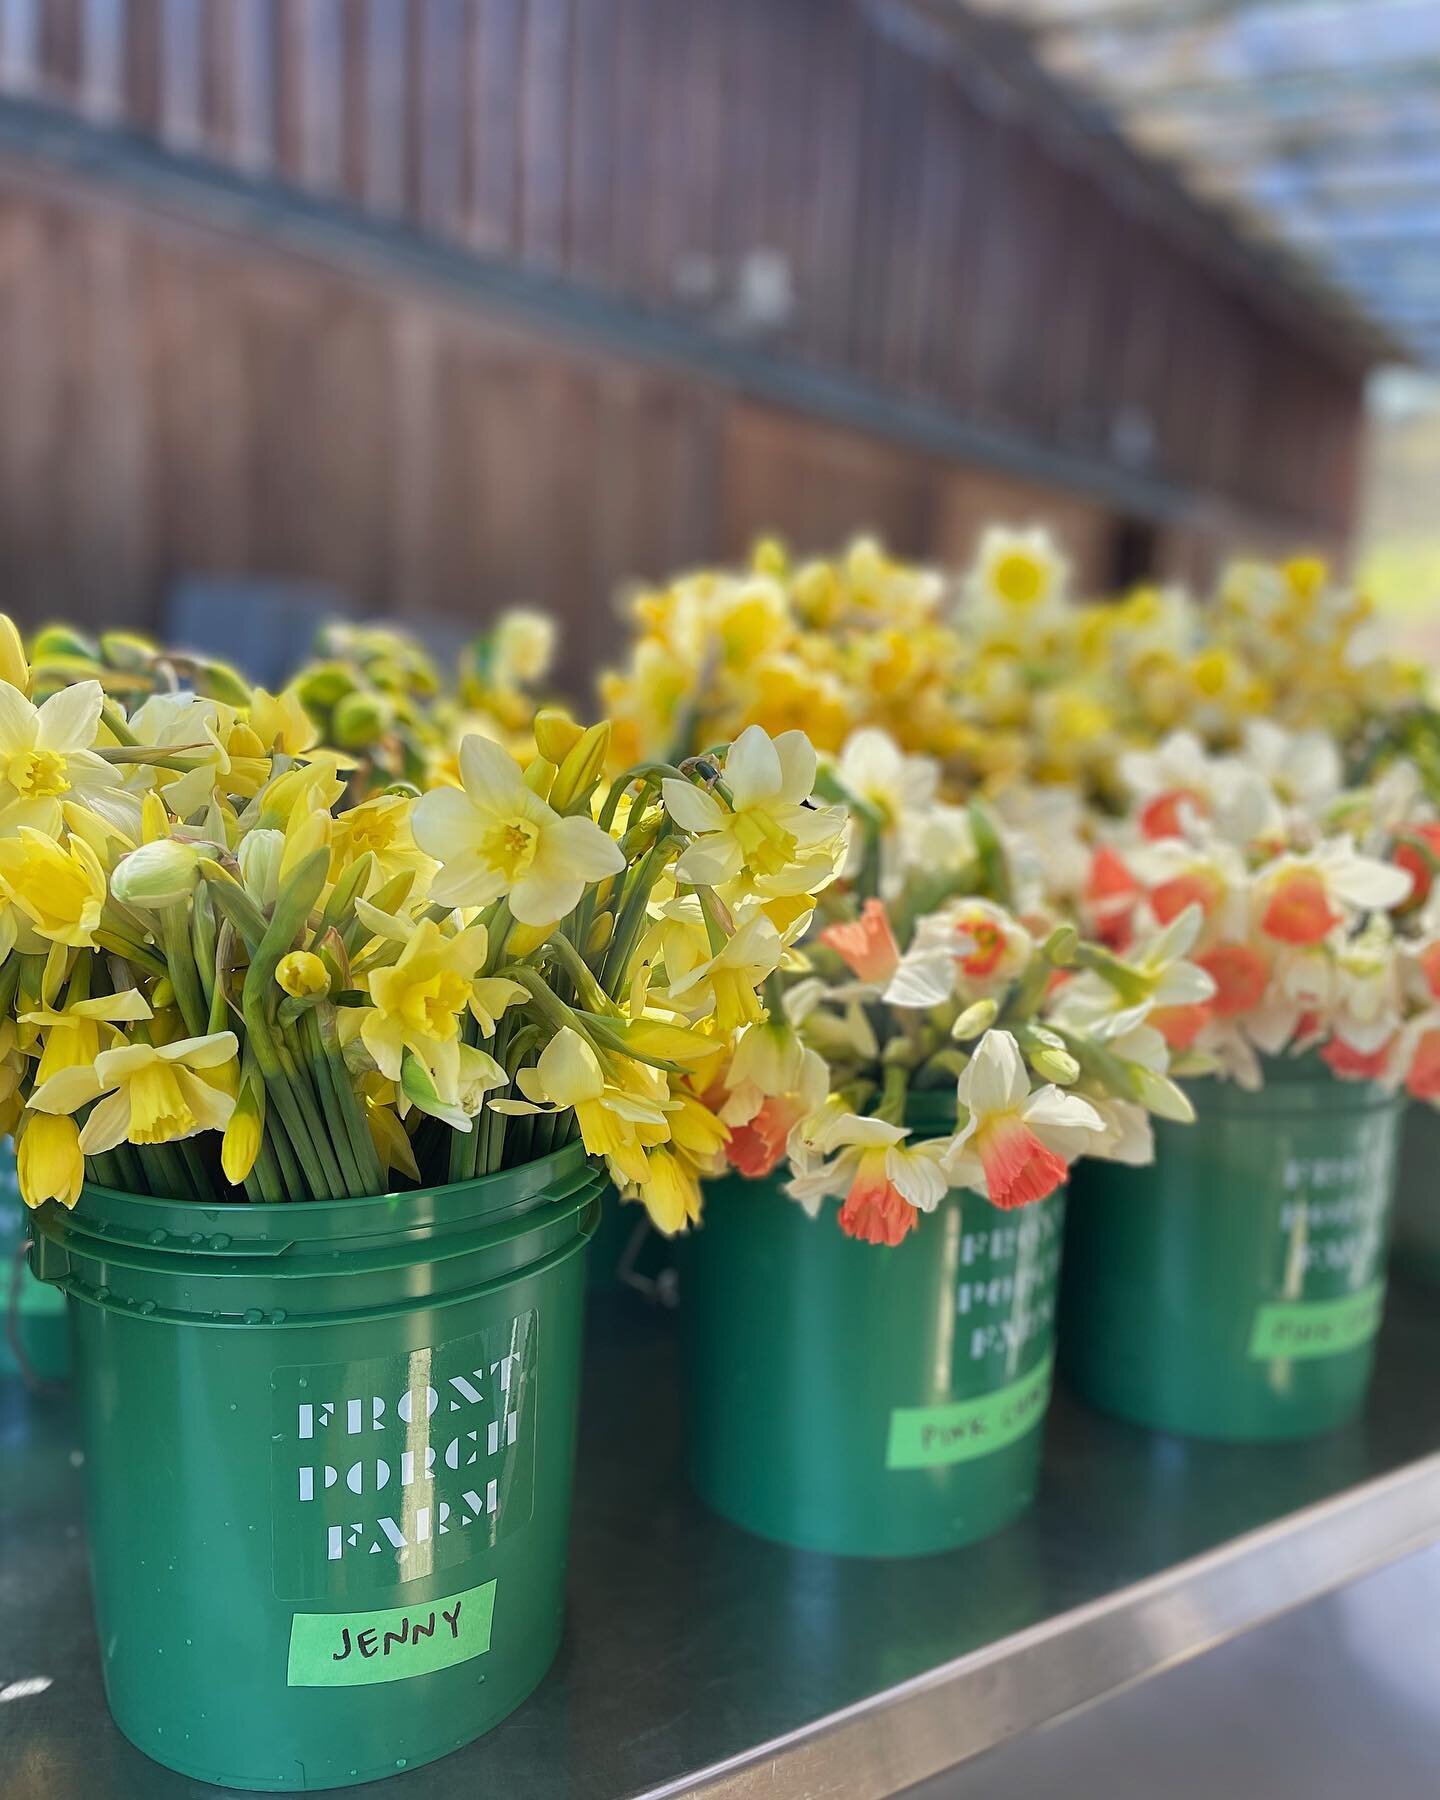 🌼Spring flowers are here!! 🌸
Brave the rain and come out to the San Rafael Farmers&rsquo; Market tomorrow to snap up gorgeous daffodils, ranunculus, anemones, poppies and more!!
.
.
.
#springflowers
#daffodils
#organicflowers
#knowyourfarmer
#fpfar